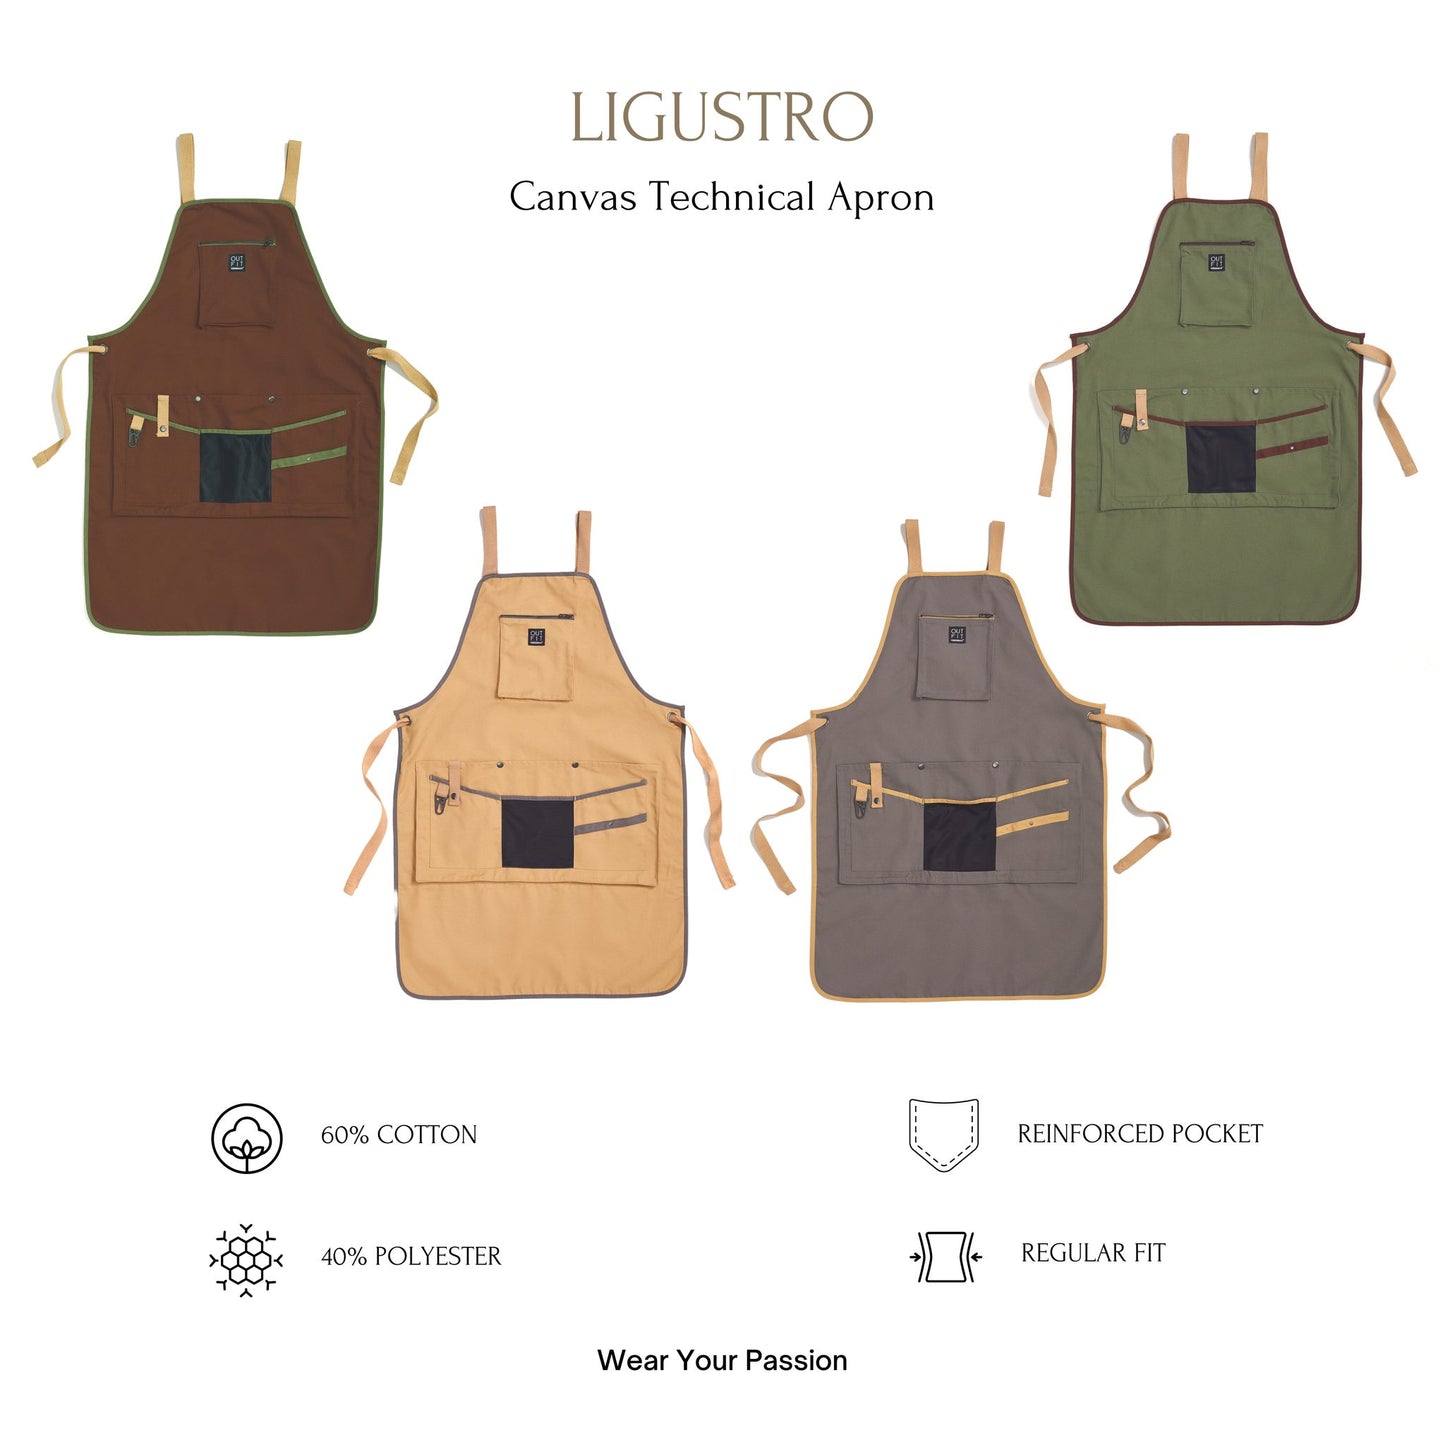 Outfit Ligustro Technical Apron